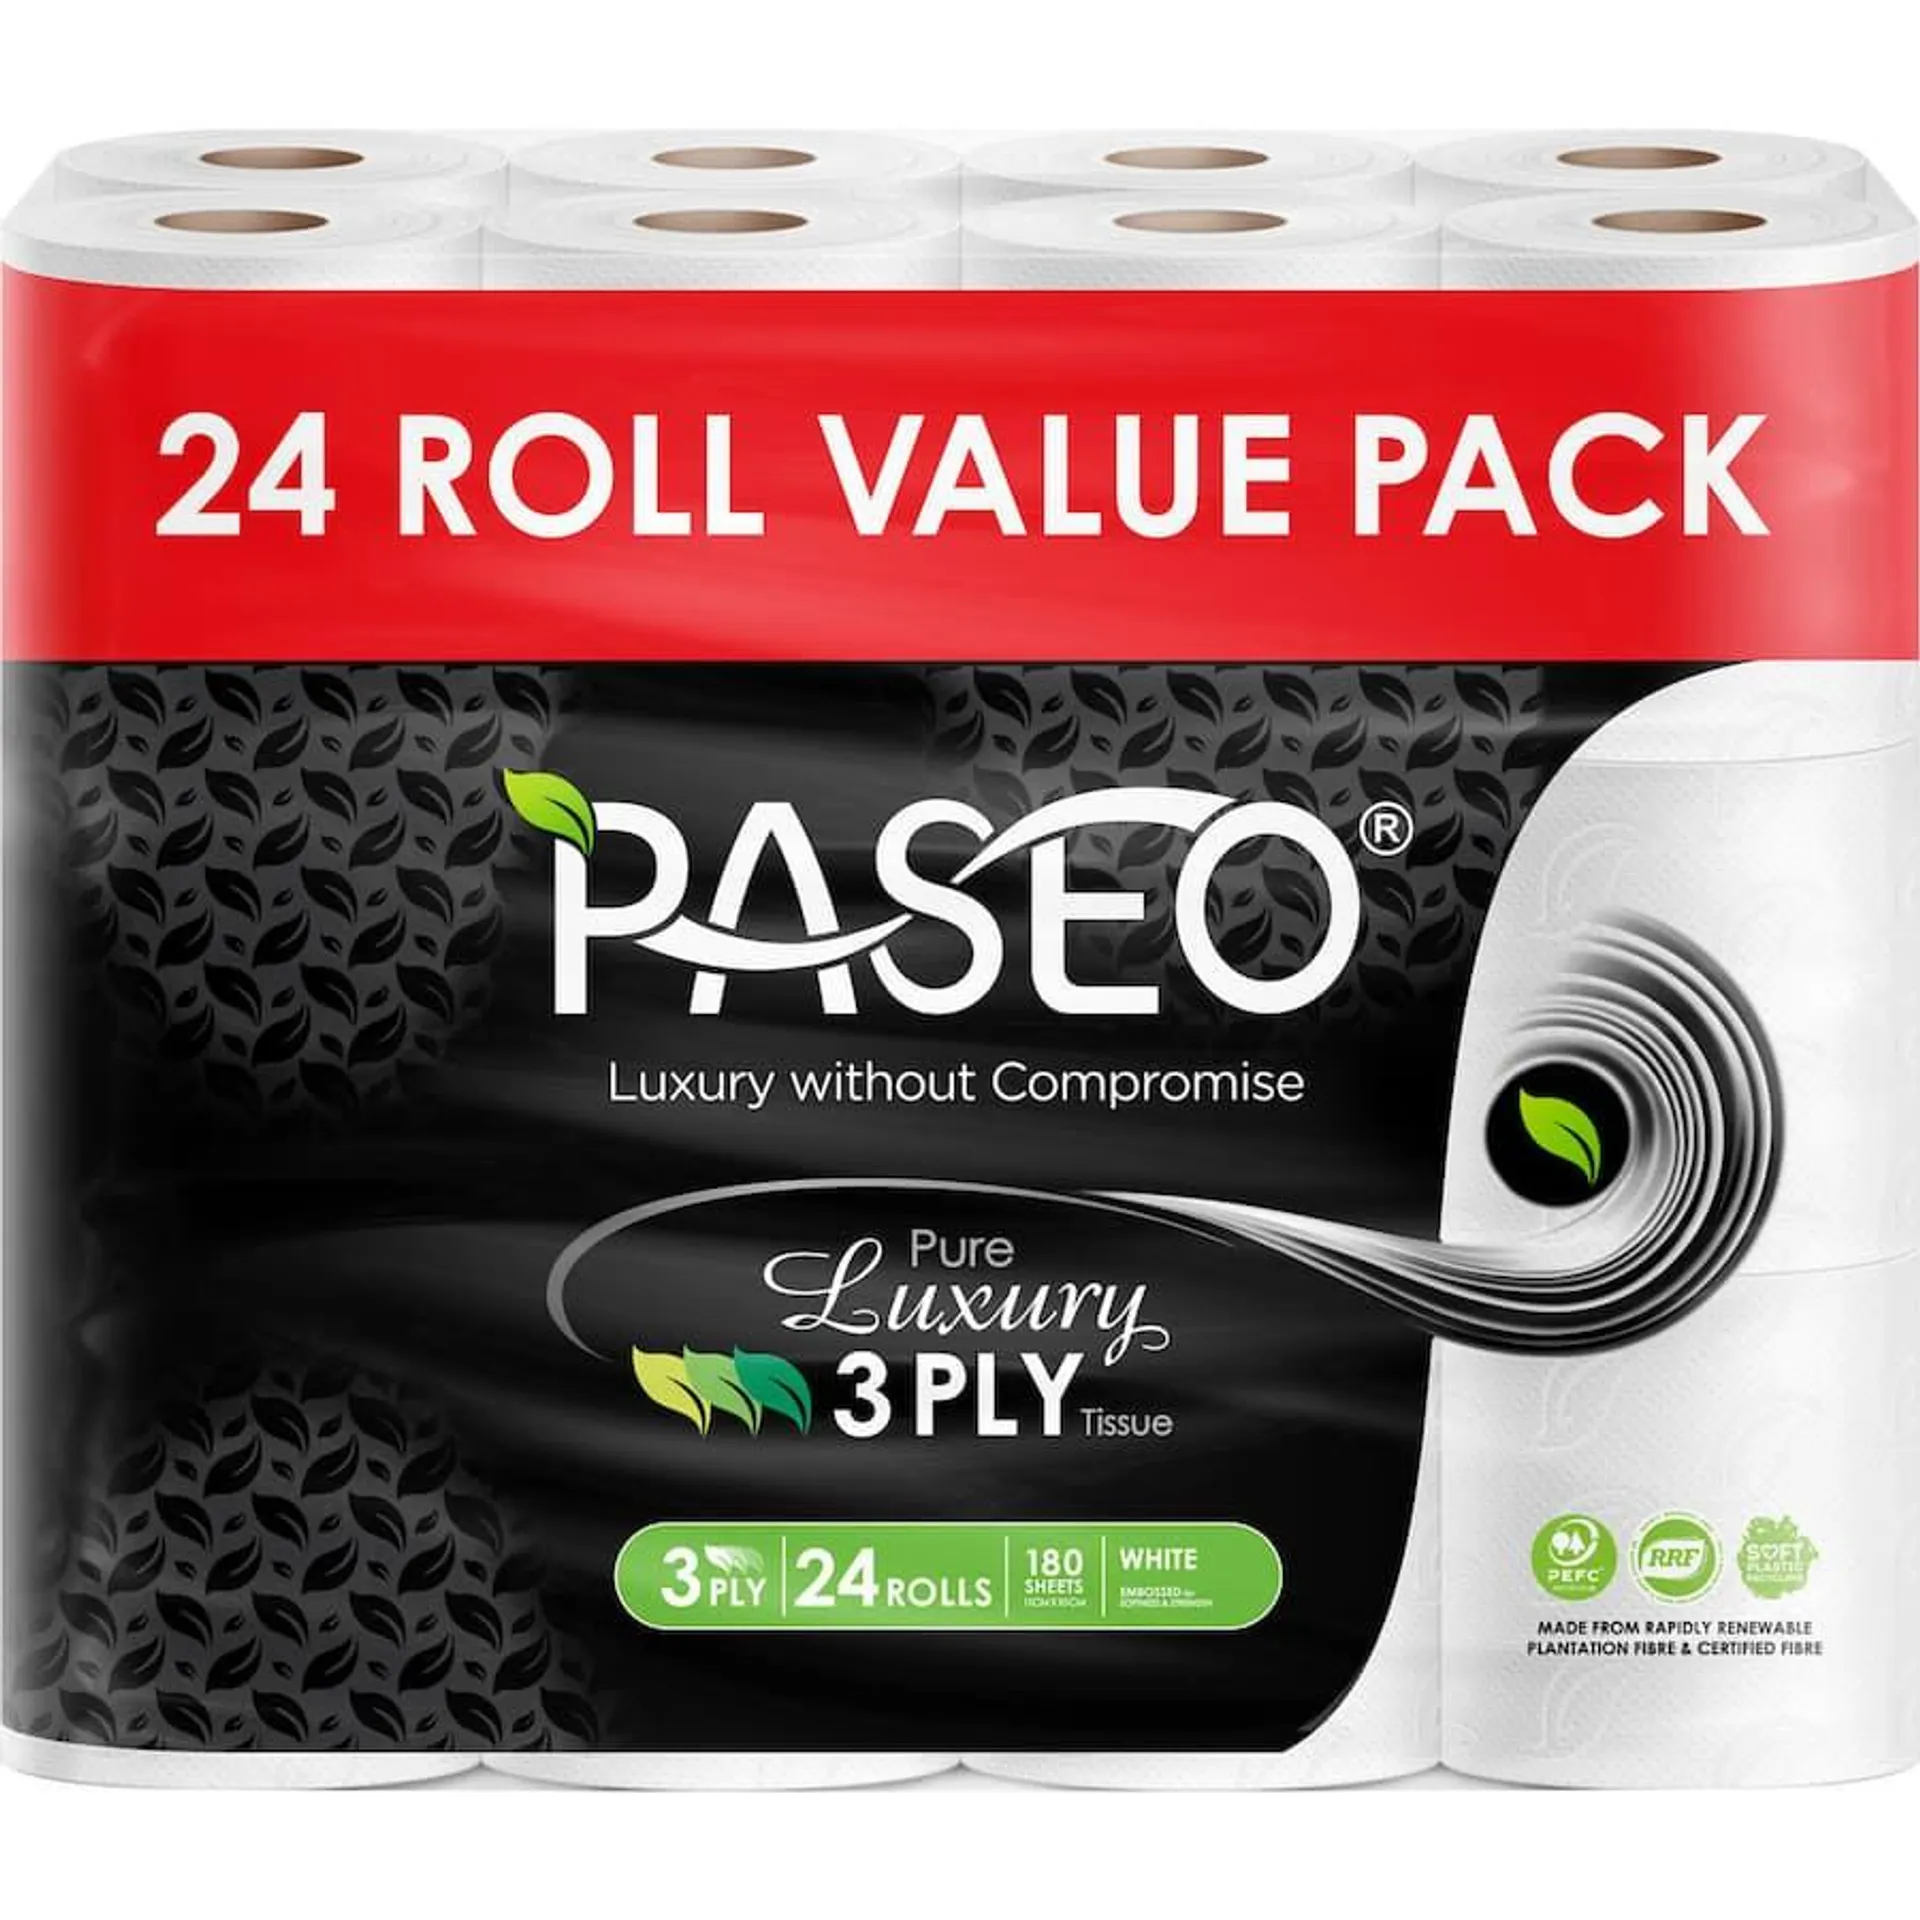 Paseo Luxury Toilet Paper 24pk 3 Ply Value Pack